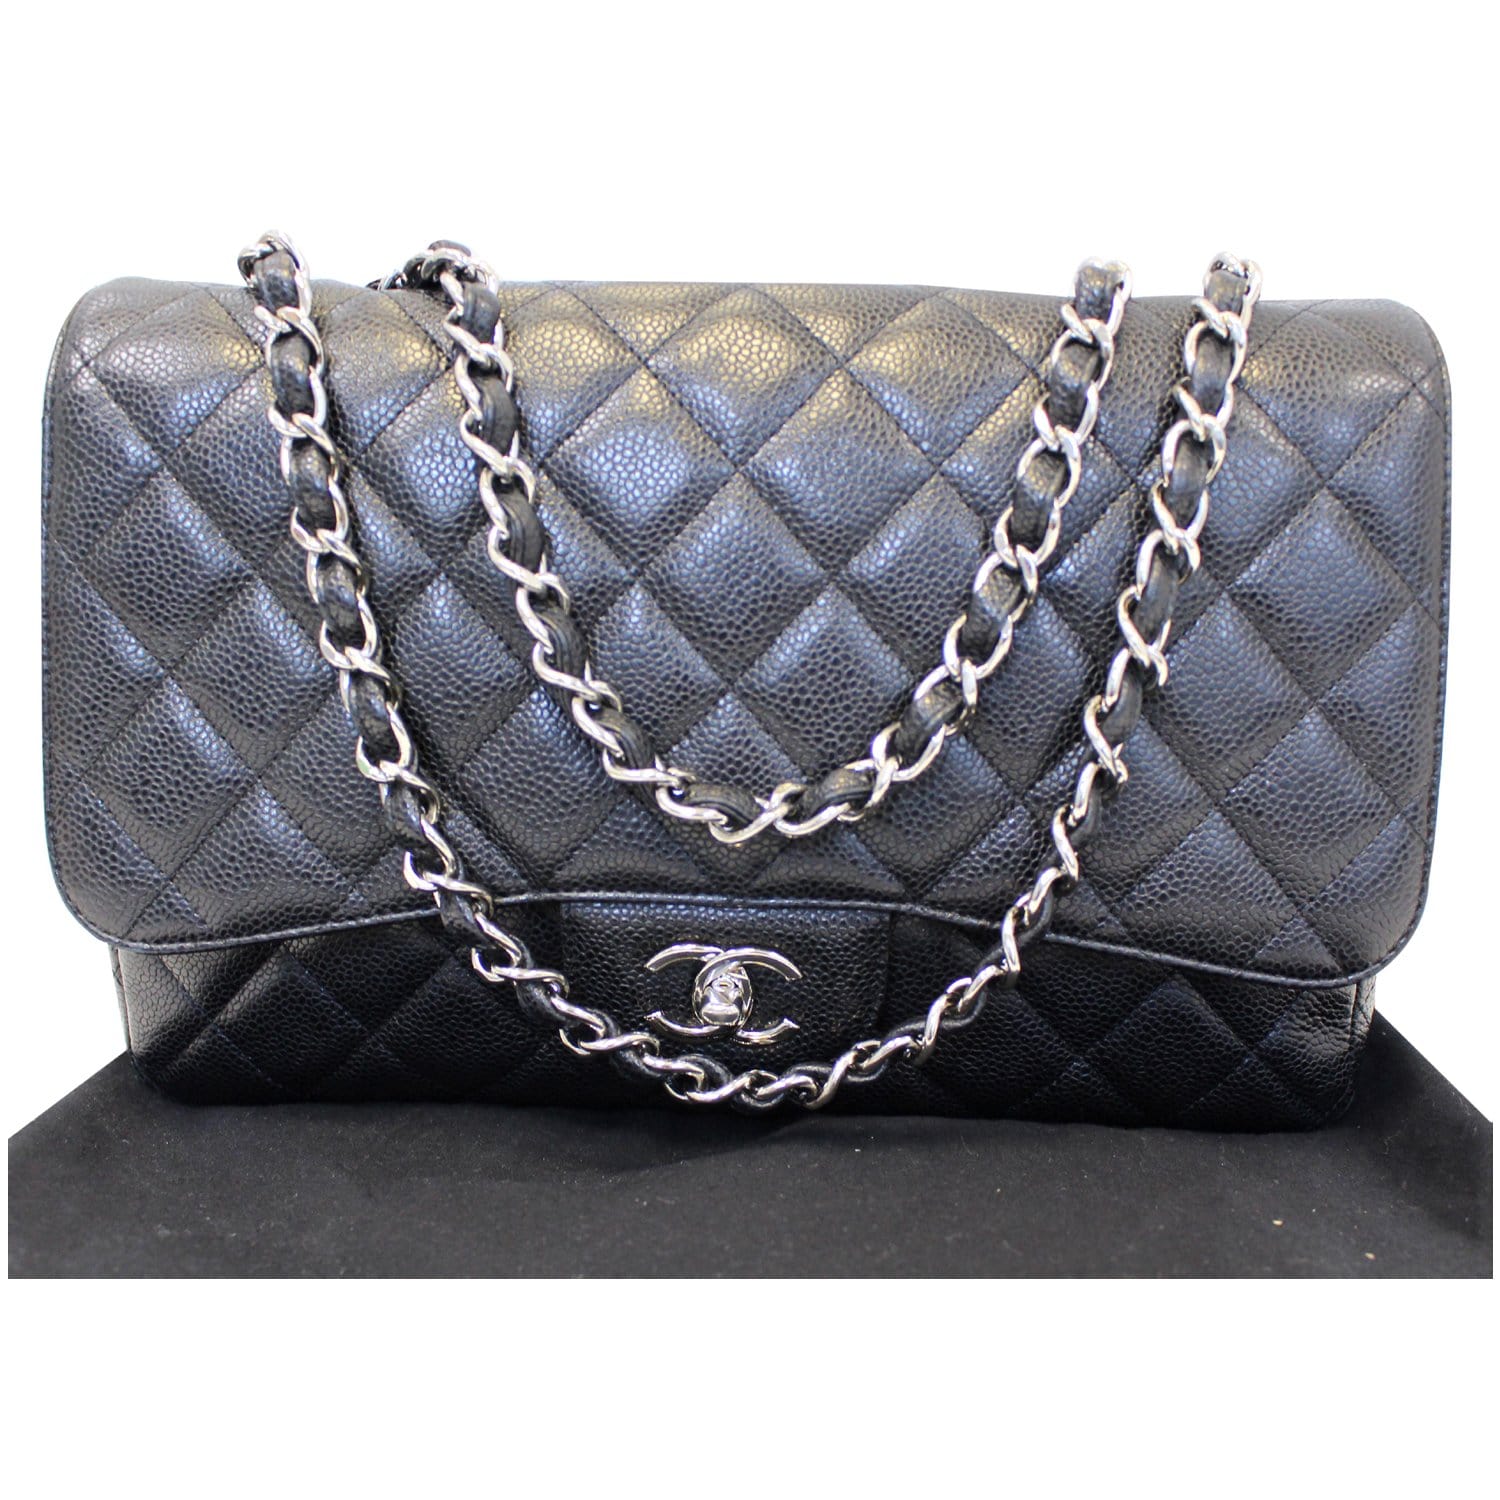 Handbags Chanel Chanel White Quilted Soft Caviar Leather Maxi Classic Single Flap Bag with Silver HW